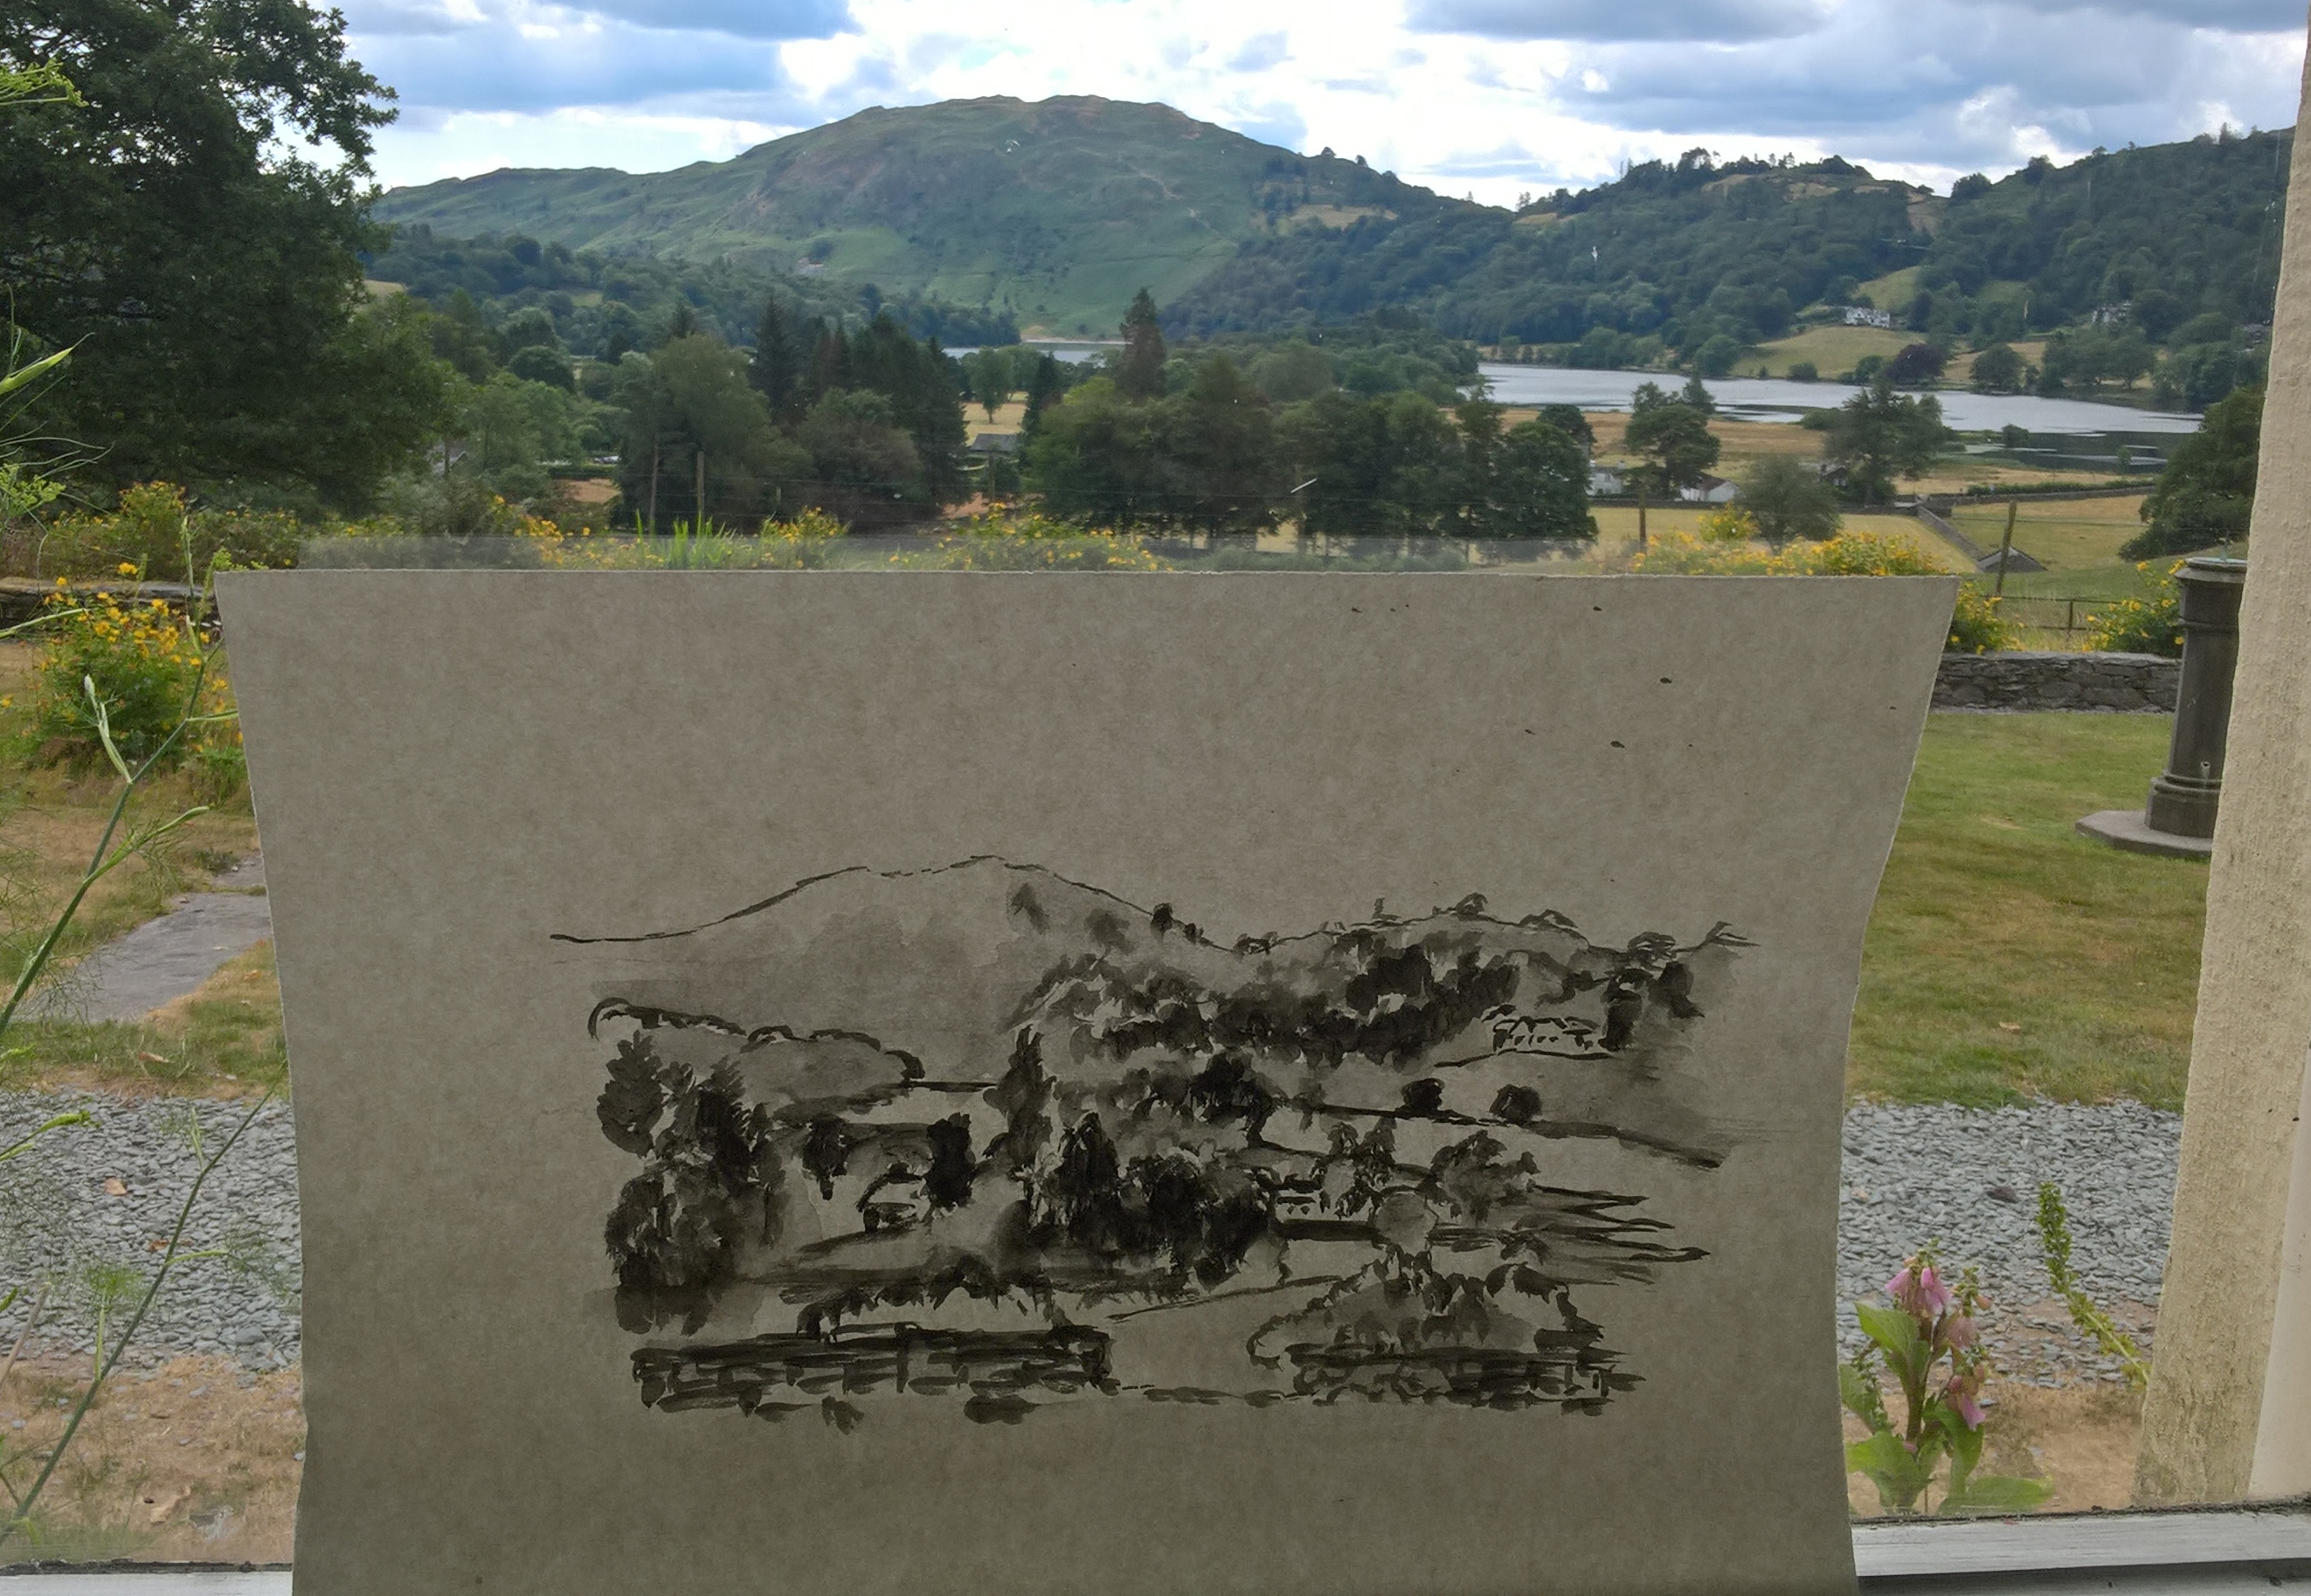 Allen Banks and the seat of William Wordsworth